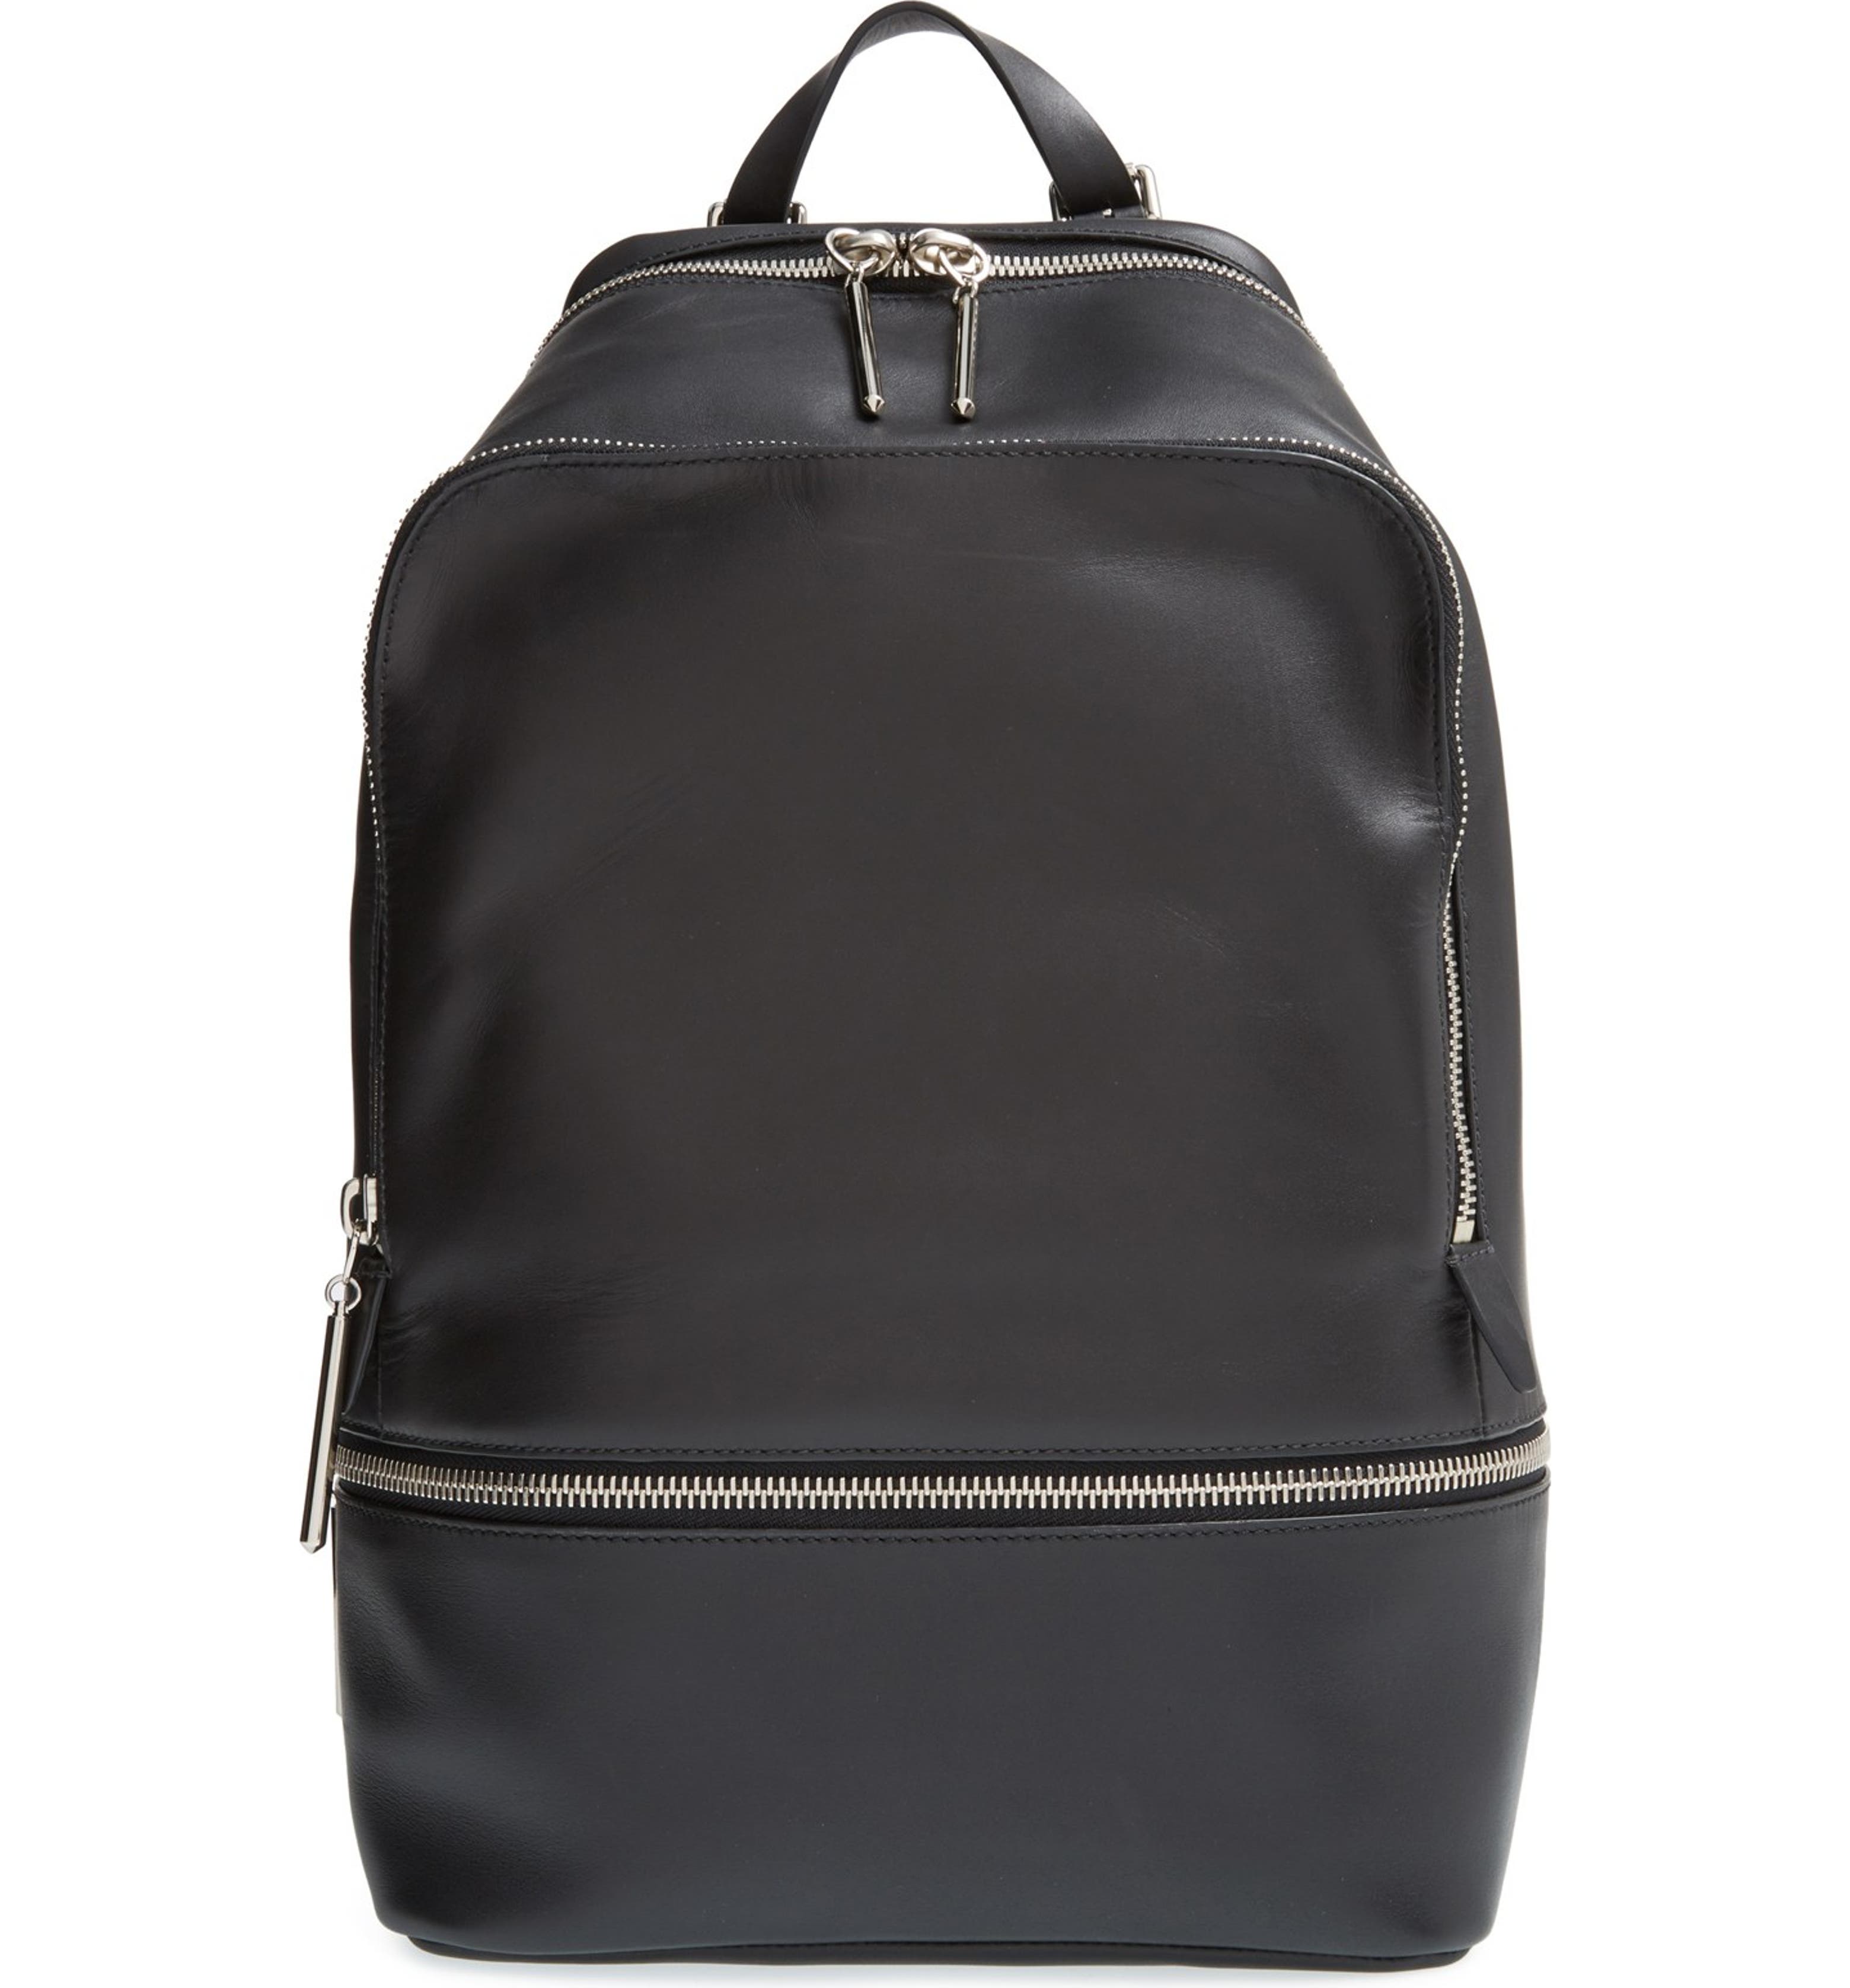 3.1 Phillip Lim '31 Hour' Zip Around Leather Backpack | Nordstrom